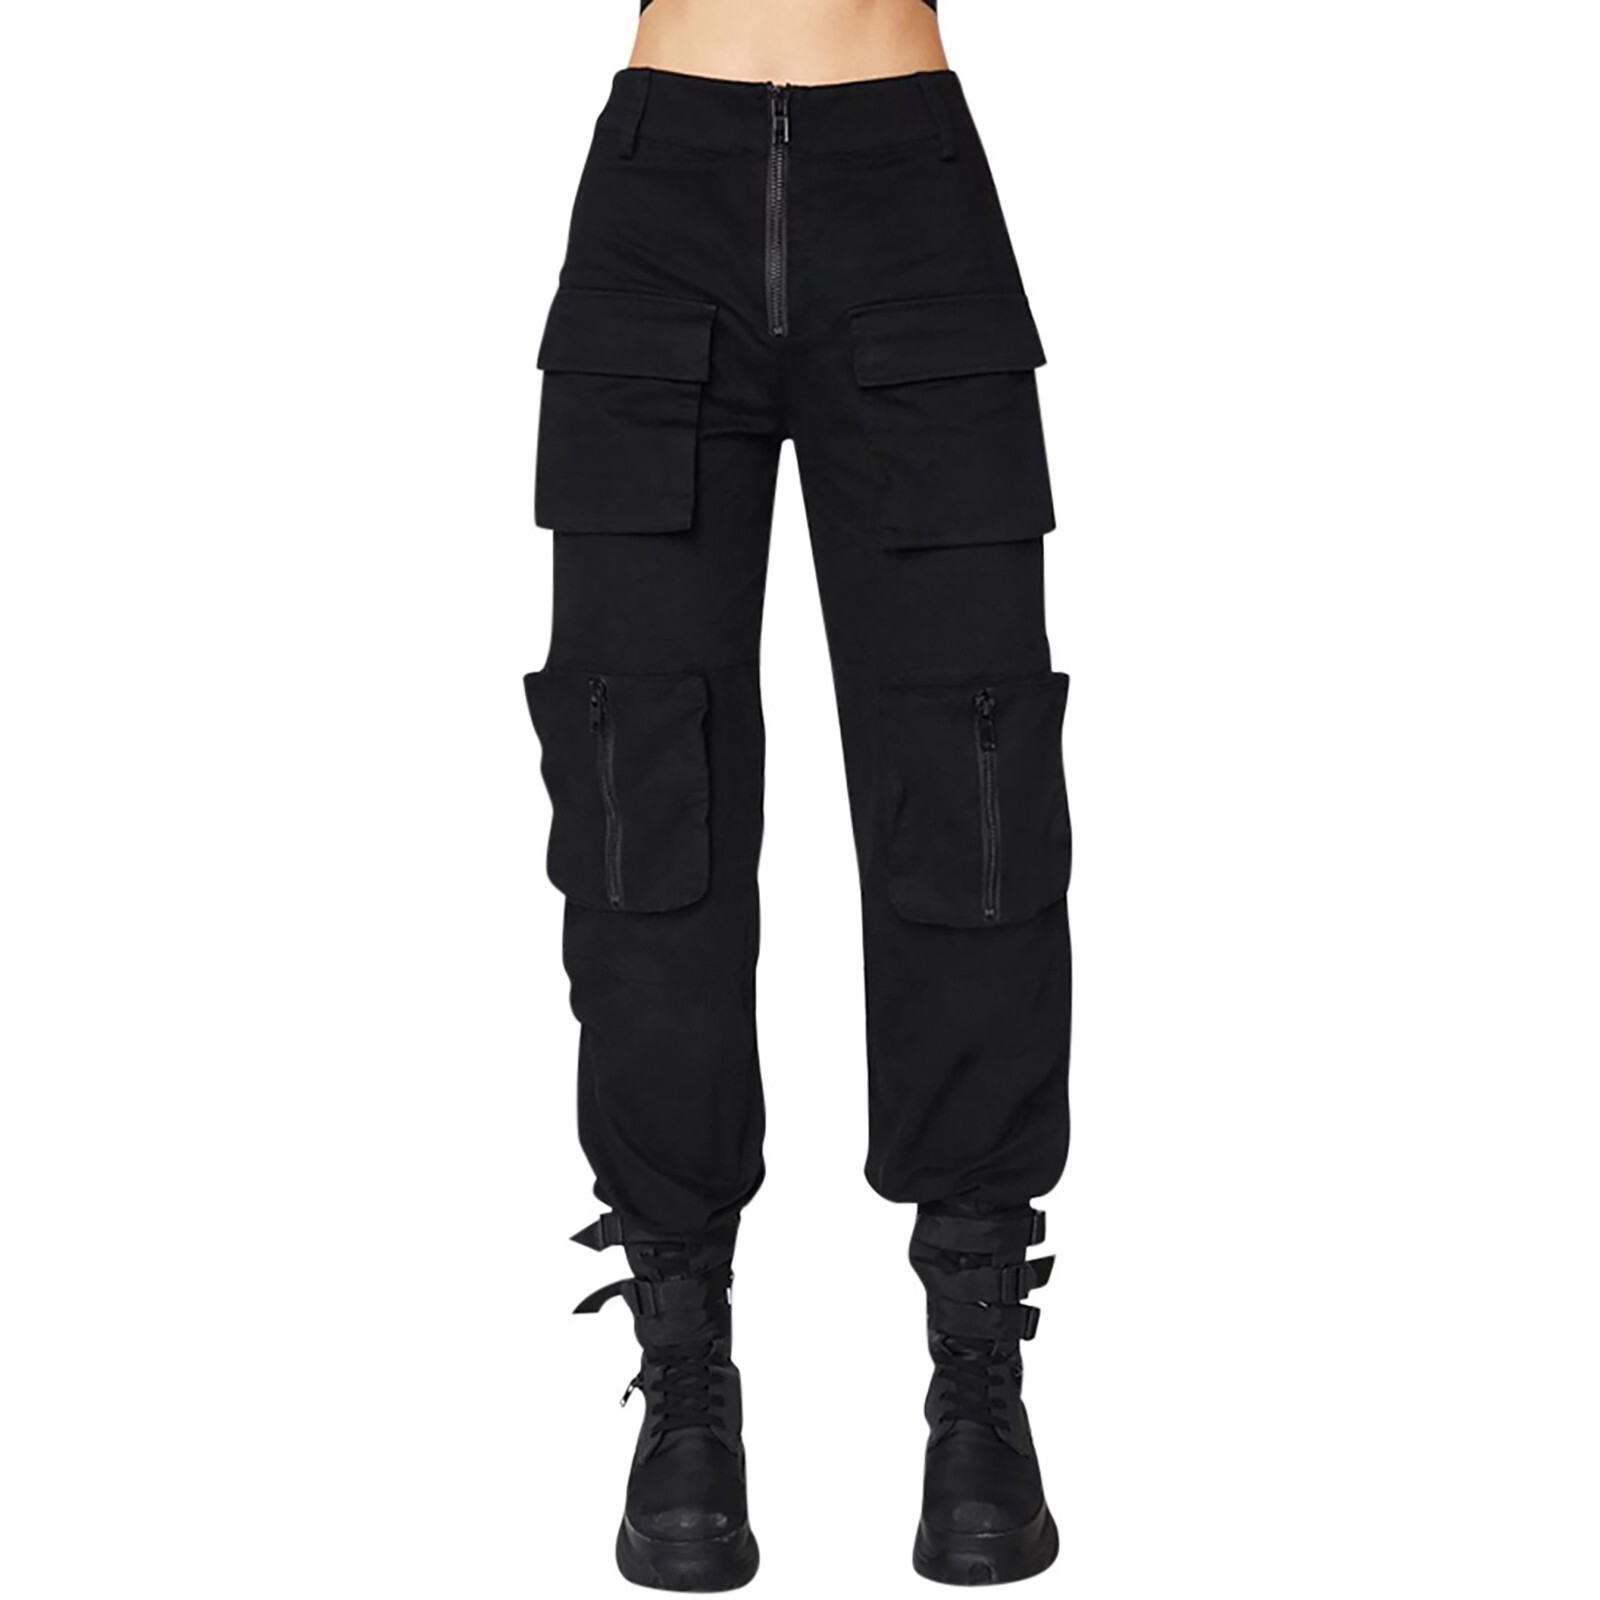 Black Cargo Pants: The Ultimate Must-Have in Every Fashionista's Closet